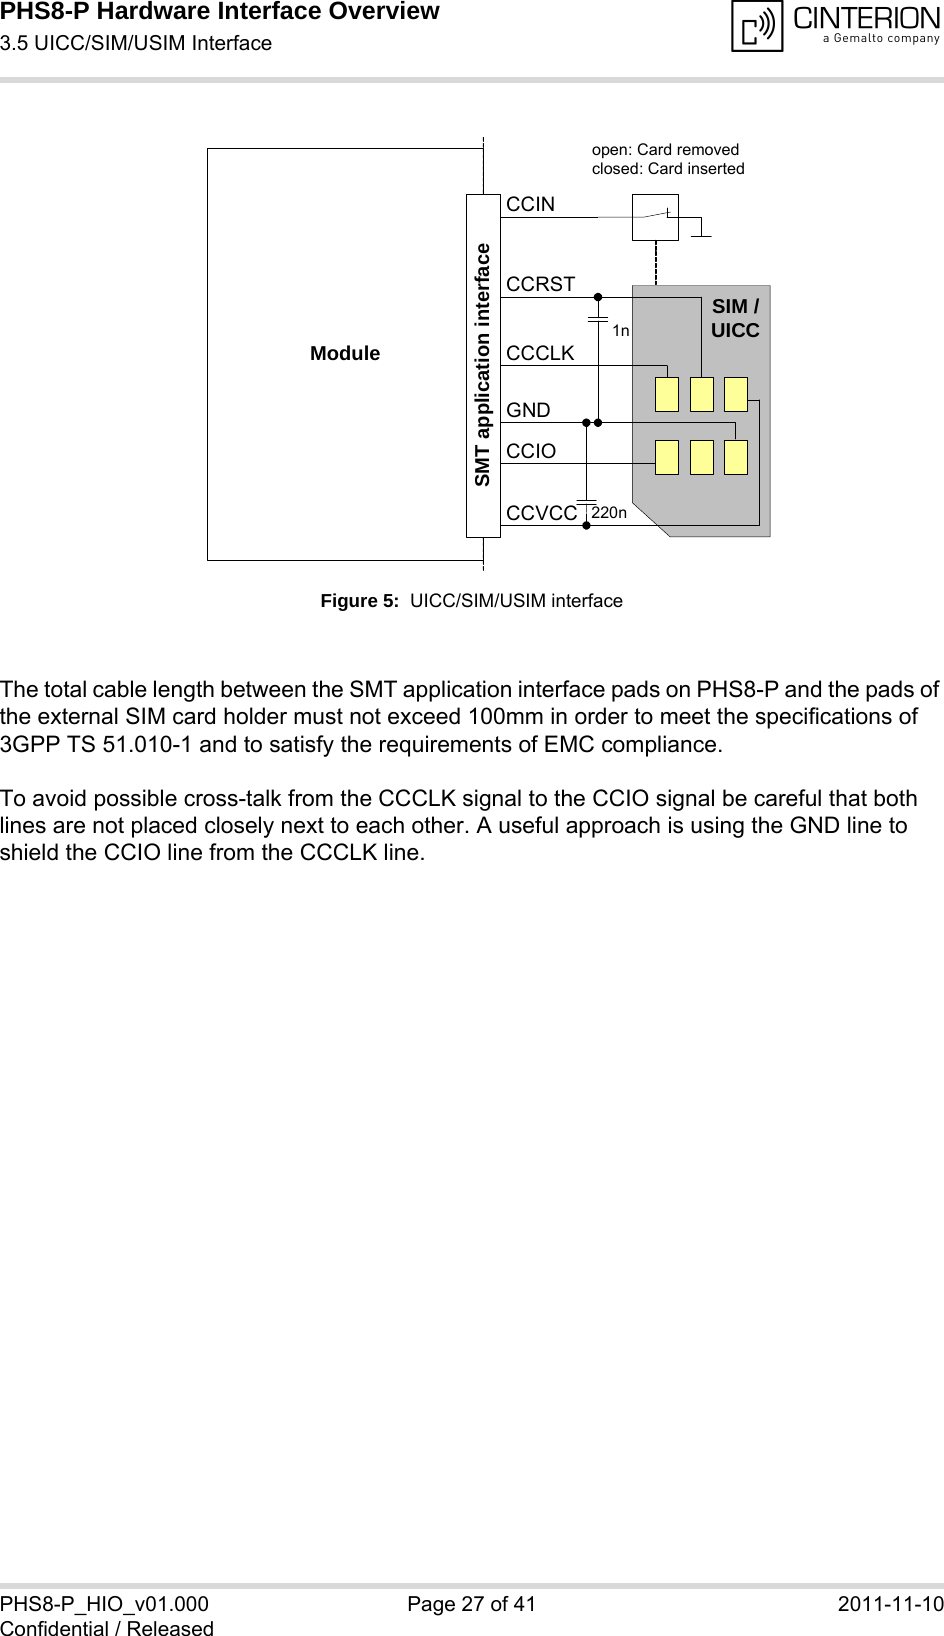 PHS8-P Hardware Interface Overview3.5 UICC/SIM/USIM Interface29PHS8-P_HIO_v01.000 Page 27 of 41 2011-11-10Confidential / ReleasedFigure 5:  UICC/SIM/USIM interfaceThe total cable length between the SMT application interface pads on PHS8-P and the pads of the external SIM card holder must not exceed 100mm in order to meet the specifications of 3GPP TS 51.010-1 and to satisfy the requirements of EMC compliance.To avoid possible cross-talk from the CCCLK signal to the CCIO signal be careful that both lines are not placed closely next to each other. A useful approach is using the GND line to shield the CCIO line from the CCCLK line.Moduleopen: Card removedclosed: Card insertedCCRSTCCVCCCCIOCCCLKCCINSIM /UICC1n220nSMT application interfaceGND